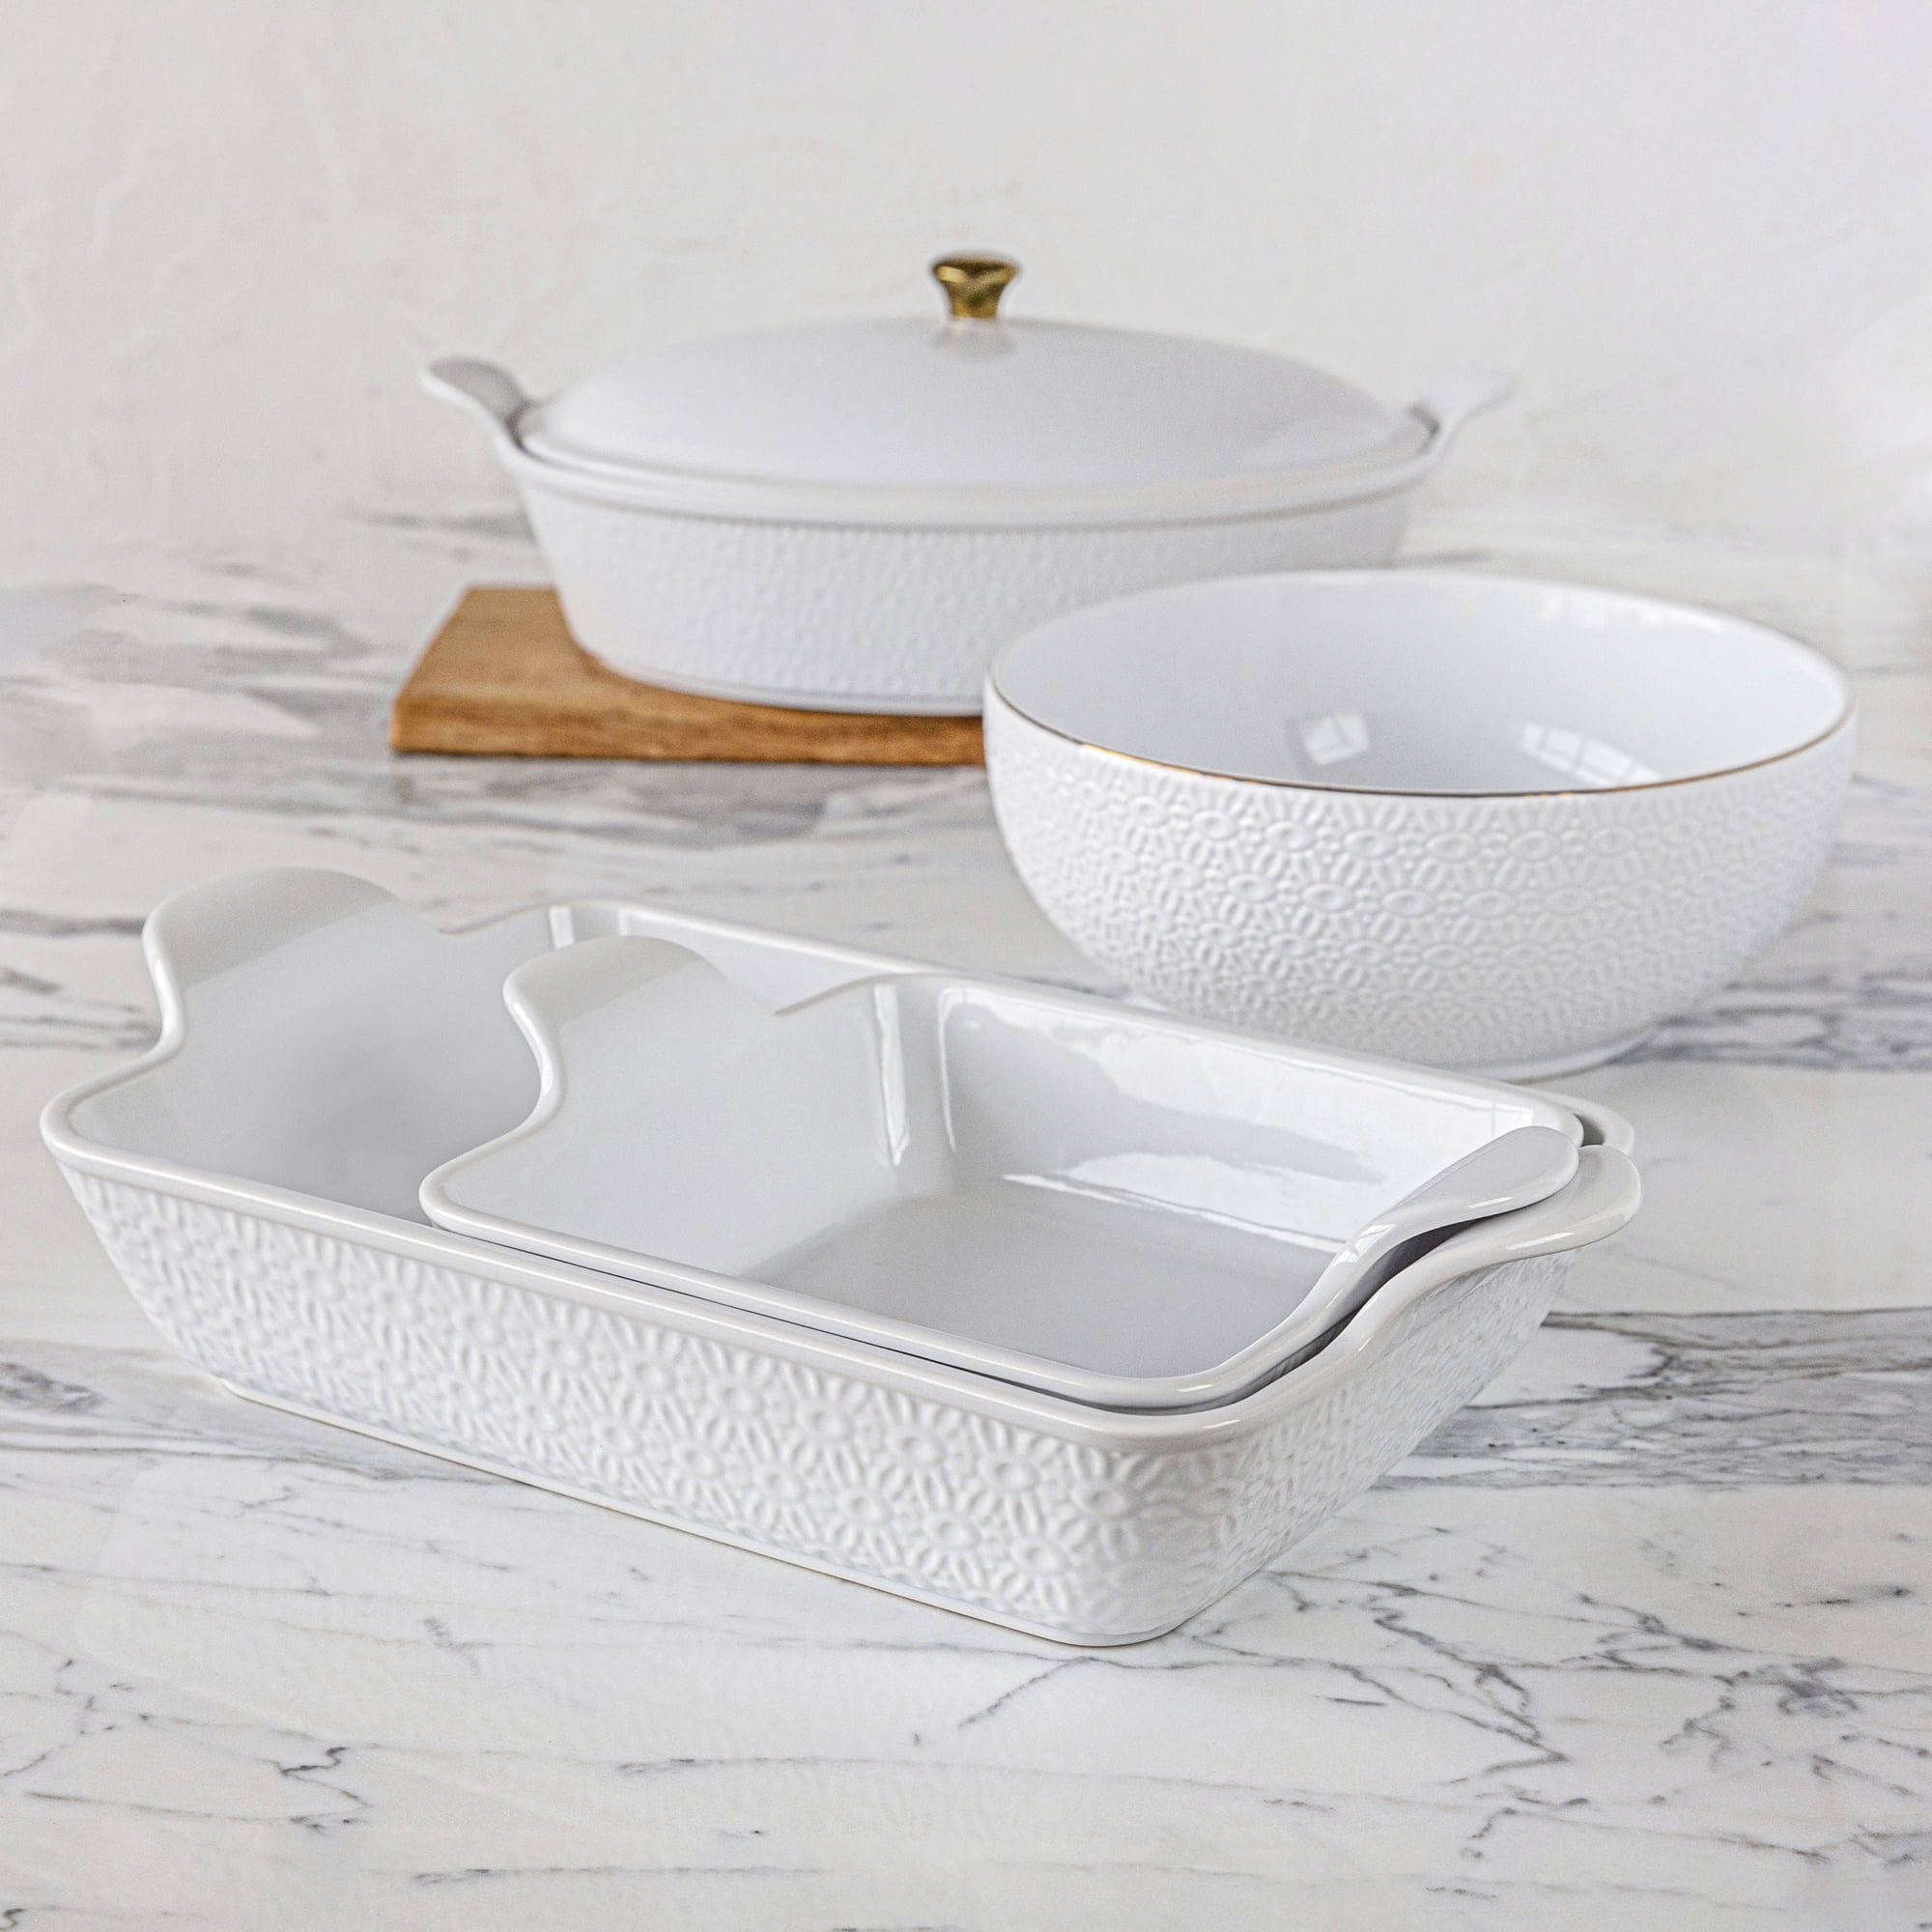 Pure Porcelain Square Baking Dish | 8x8 Inches | Lifetime Warranty | Made in